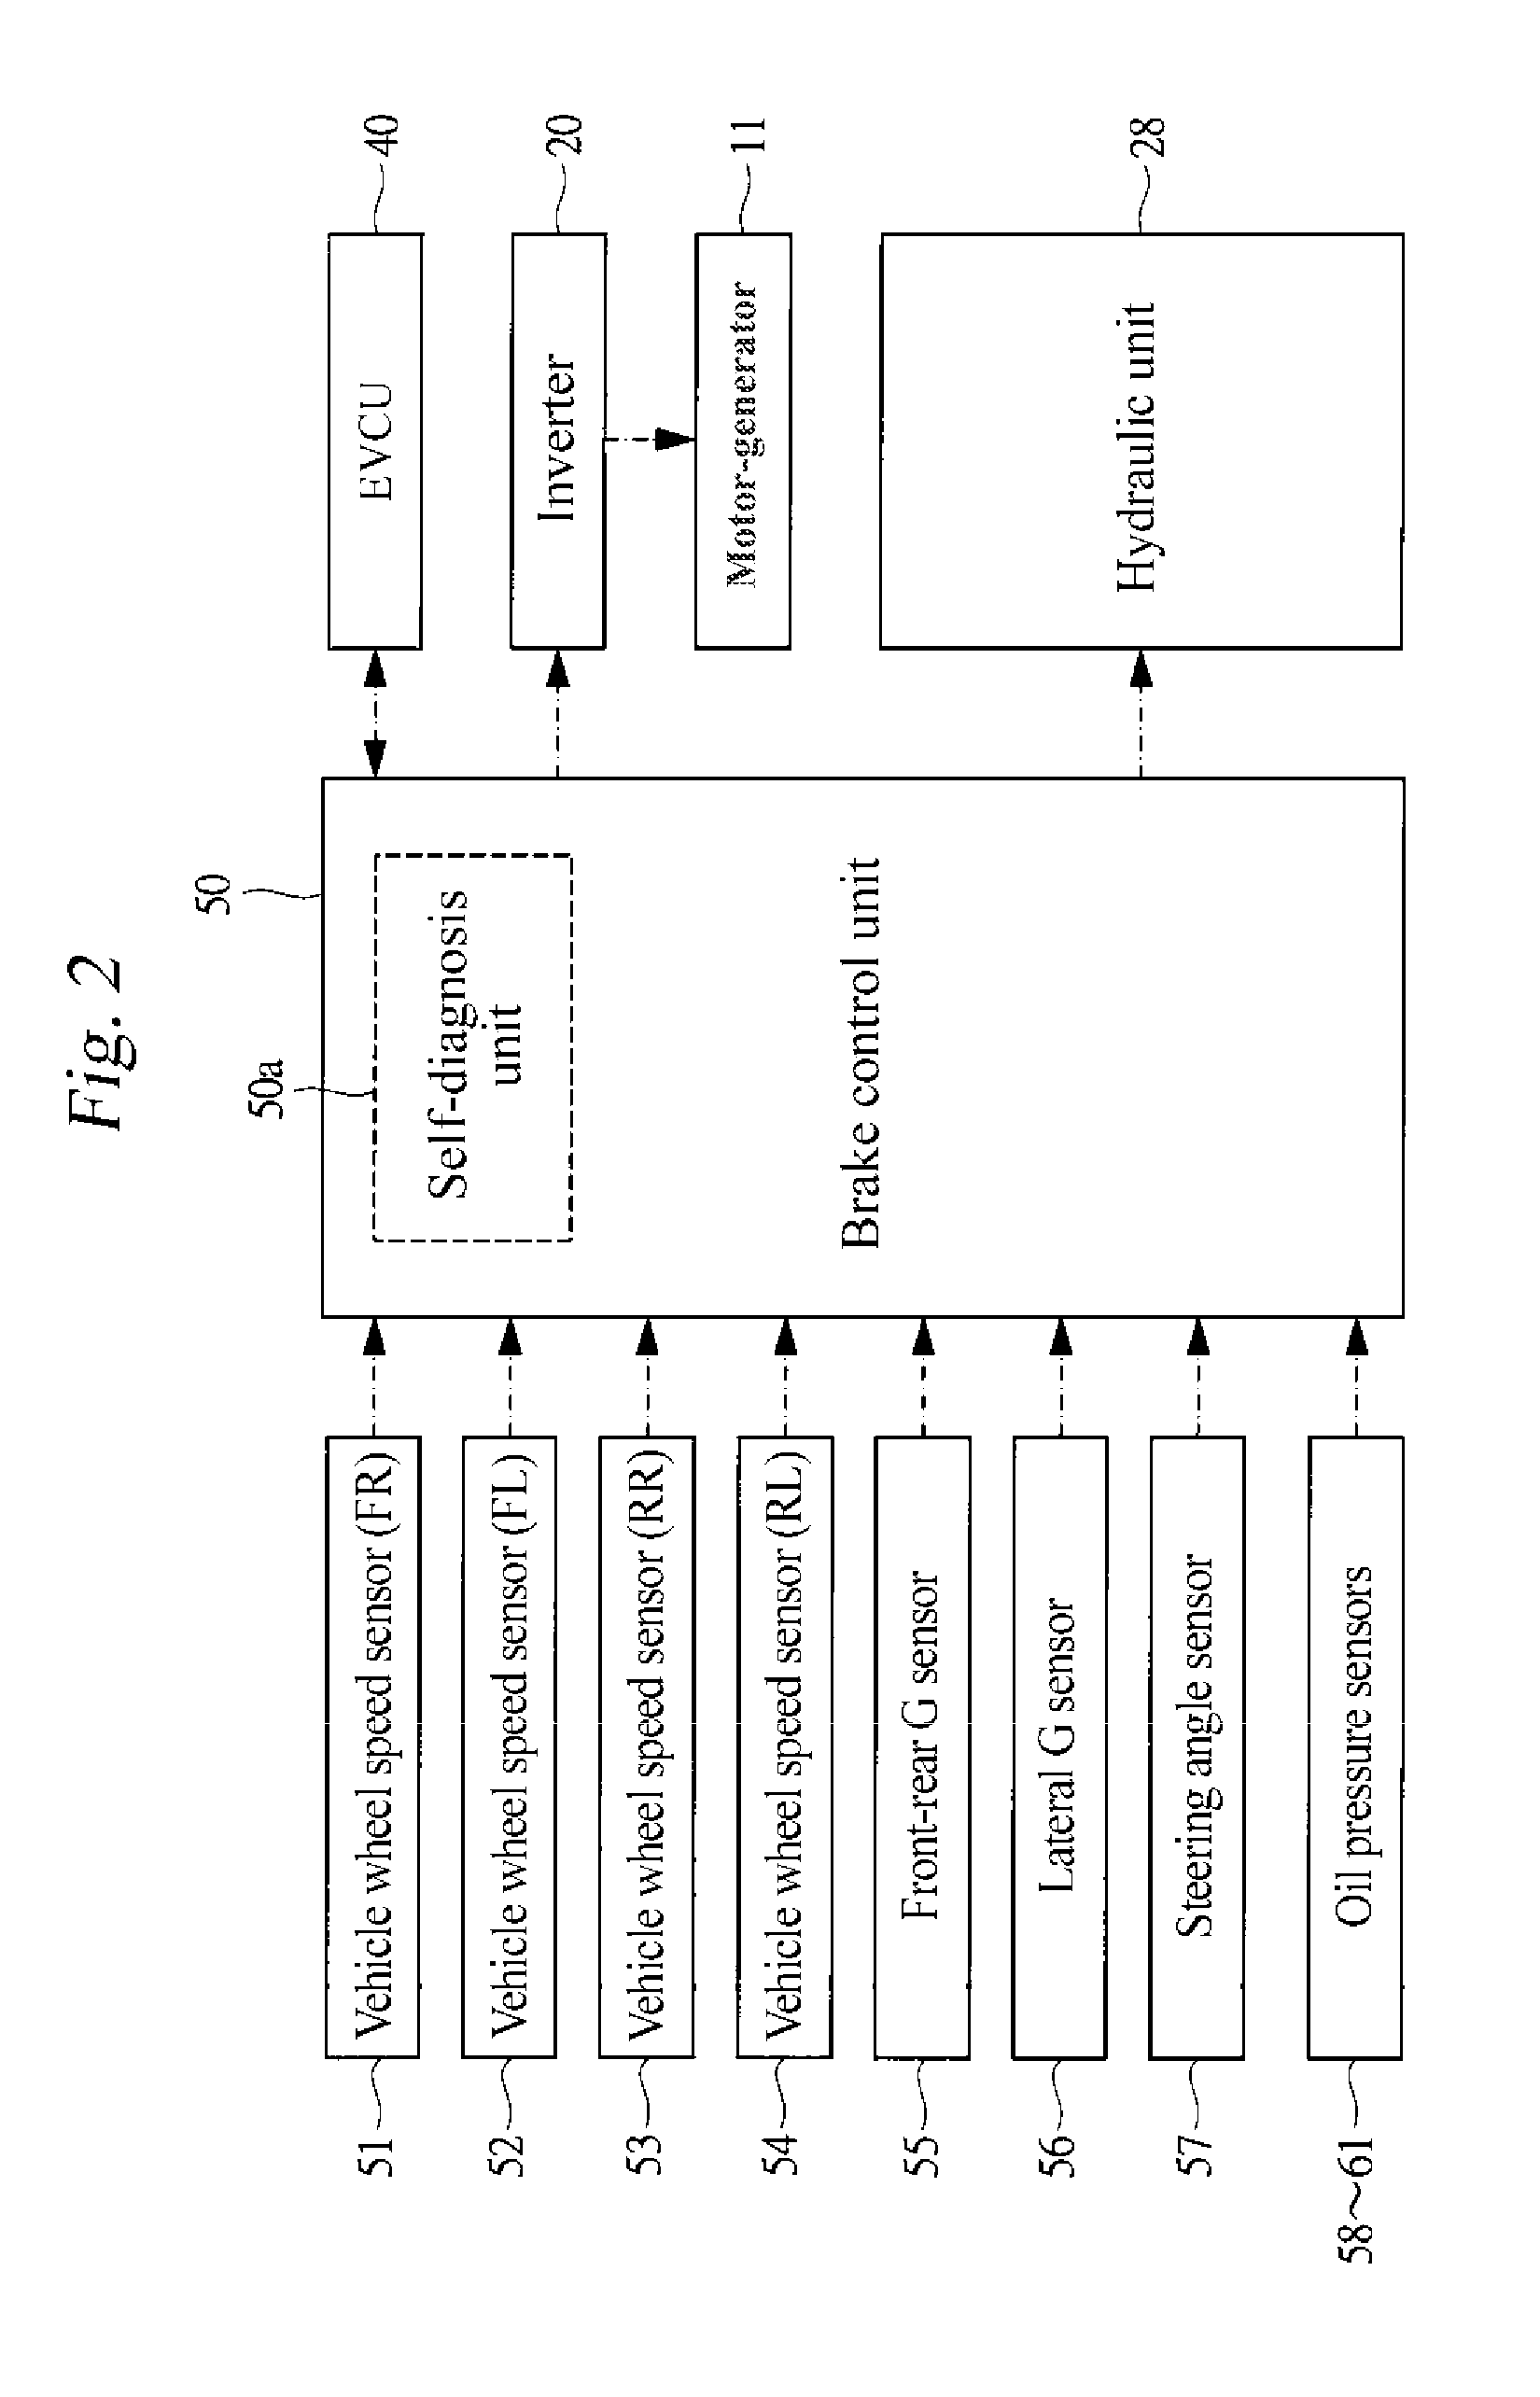 Control apparatus for electric vehicle